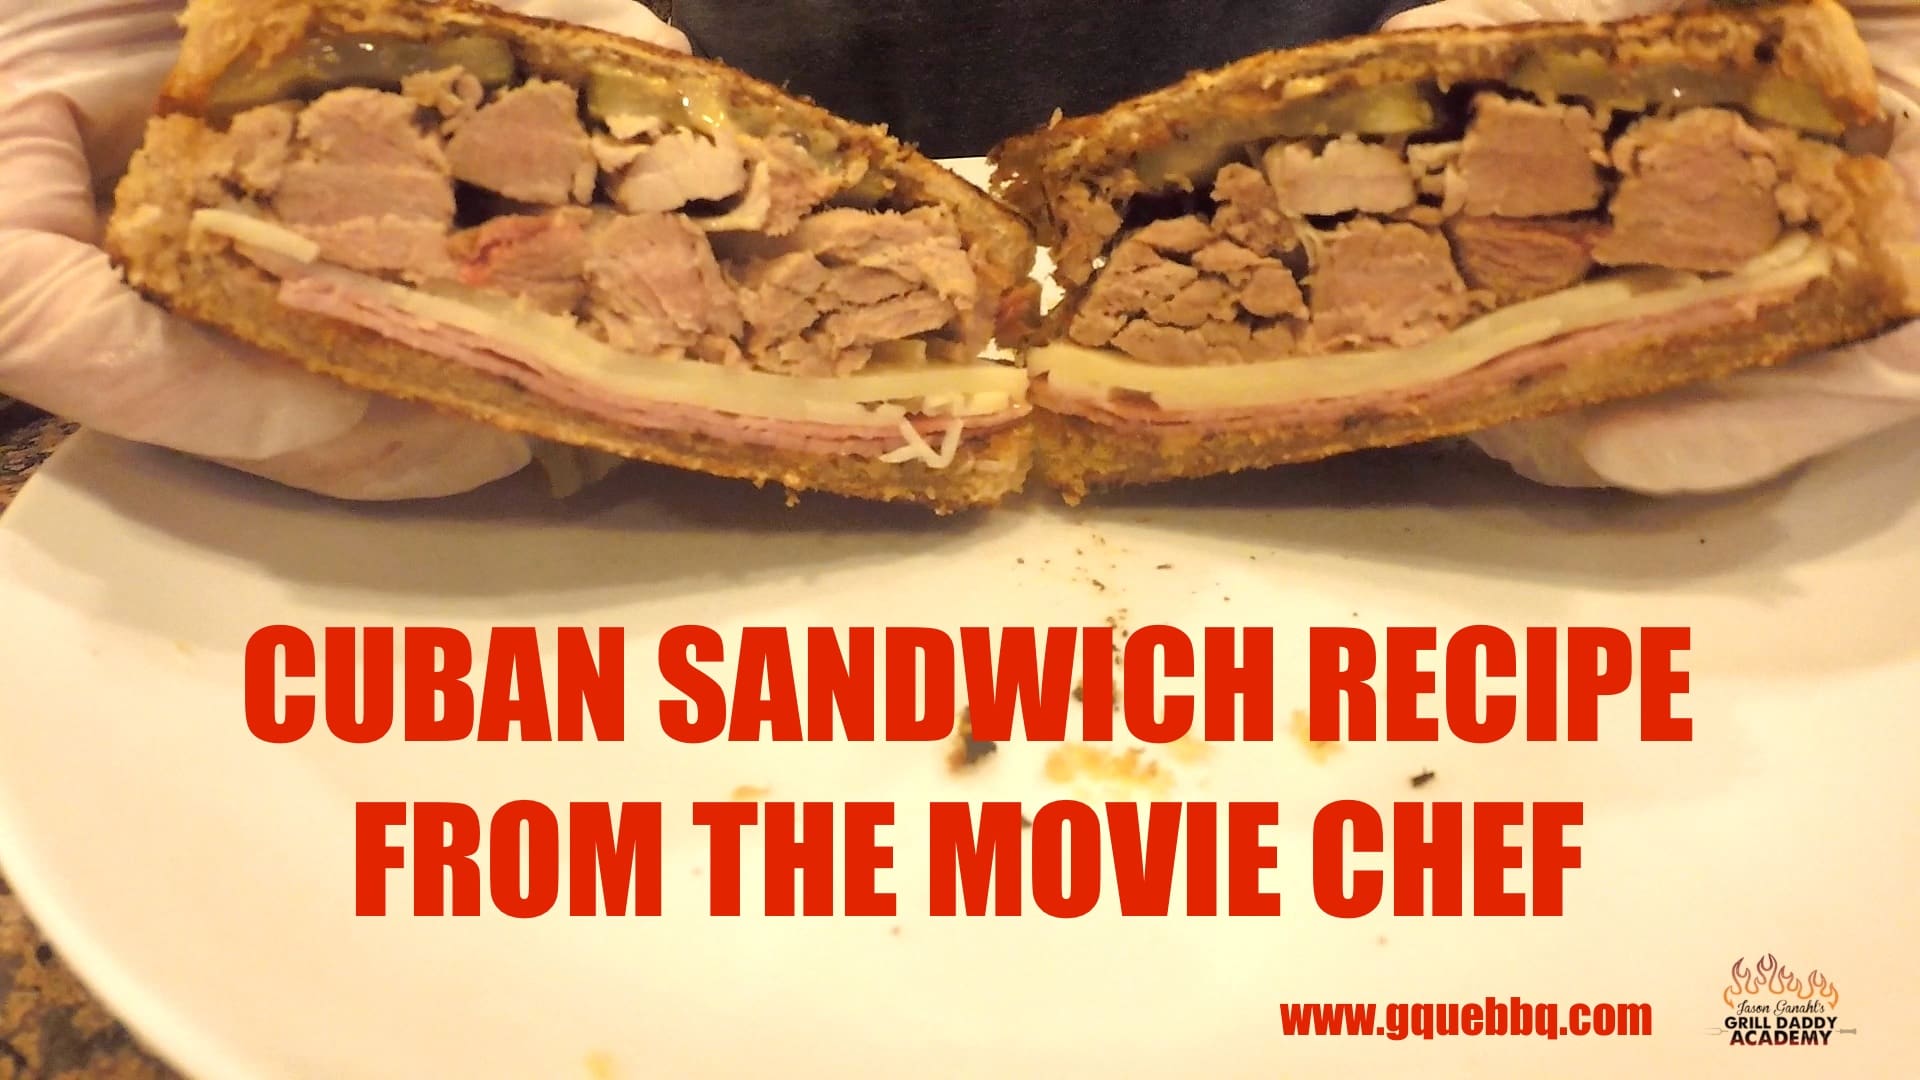 Cuban Sandwich Recipe from the Movie Chef